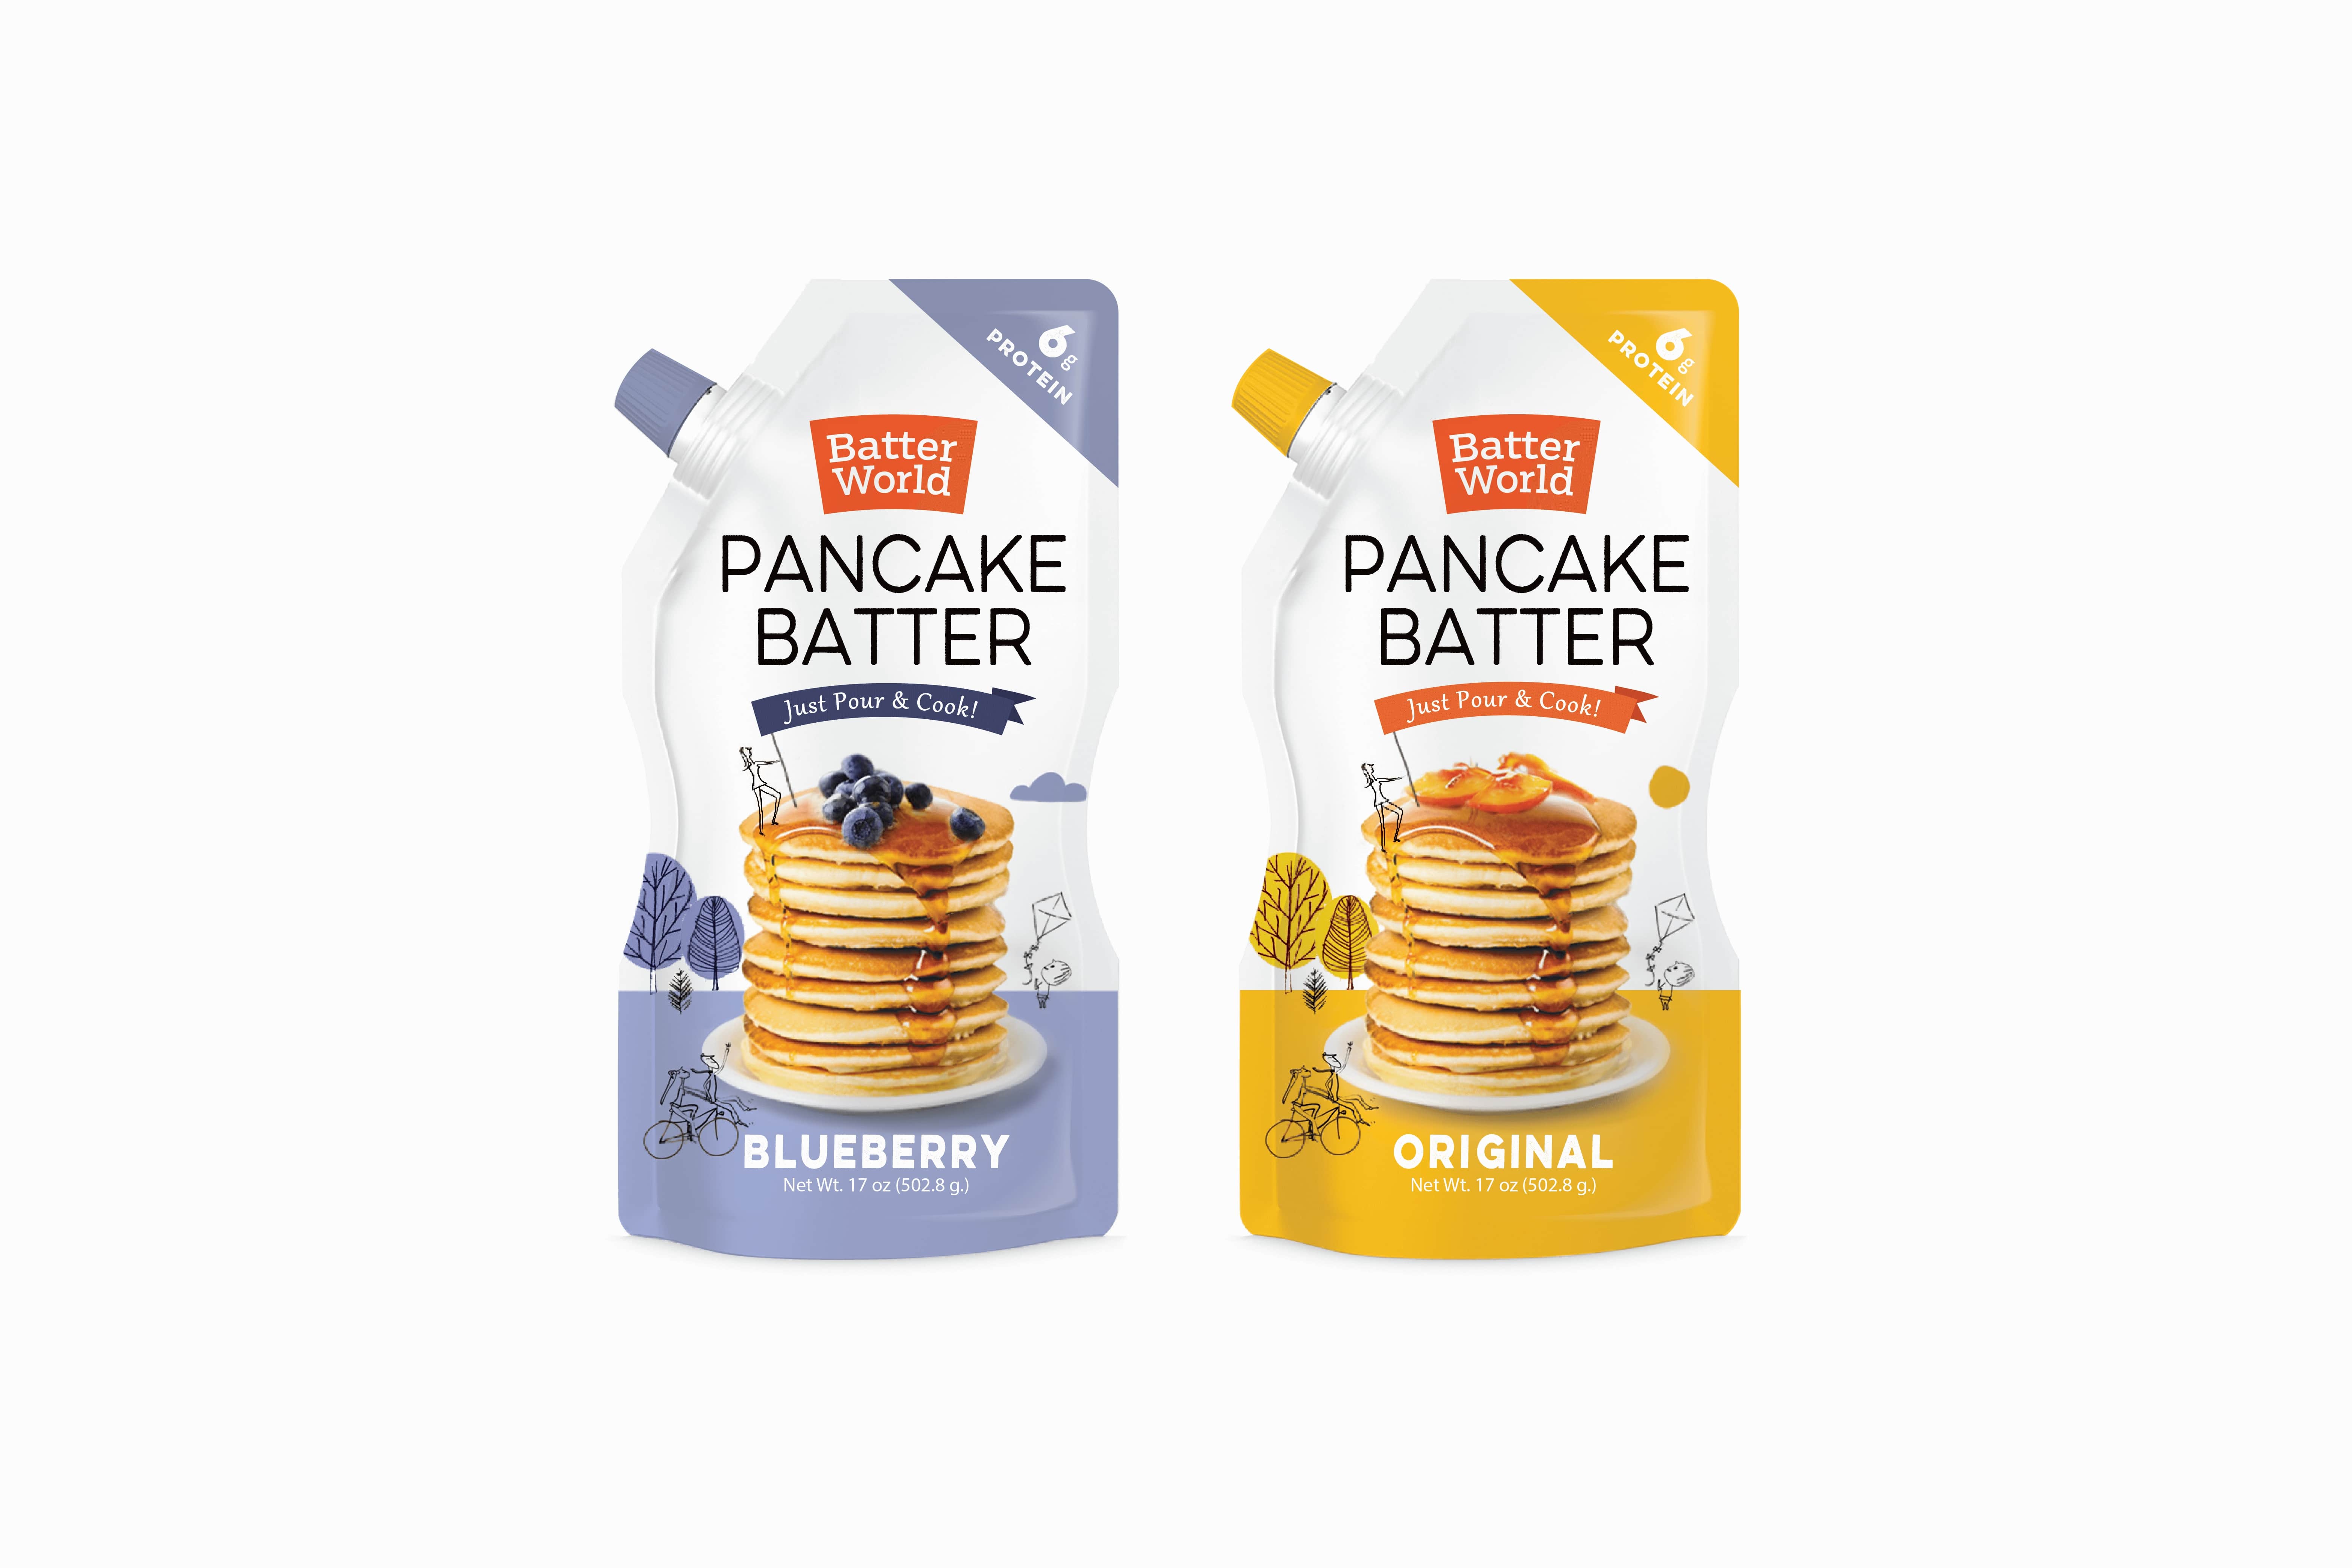 Alternate Batter World packaging design concept showing a stack of pancakes in a virtual happy batter world.